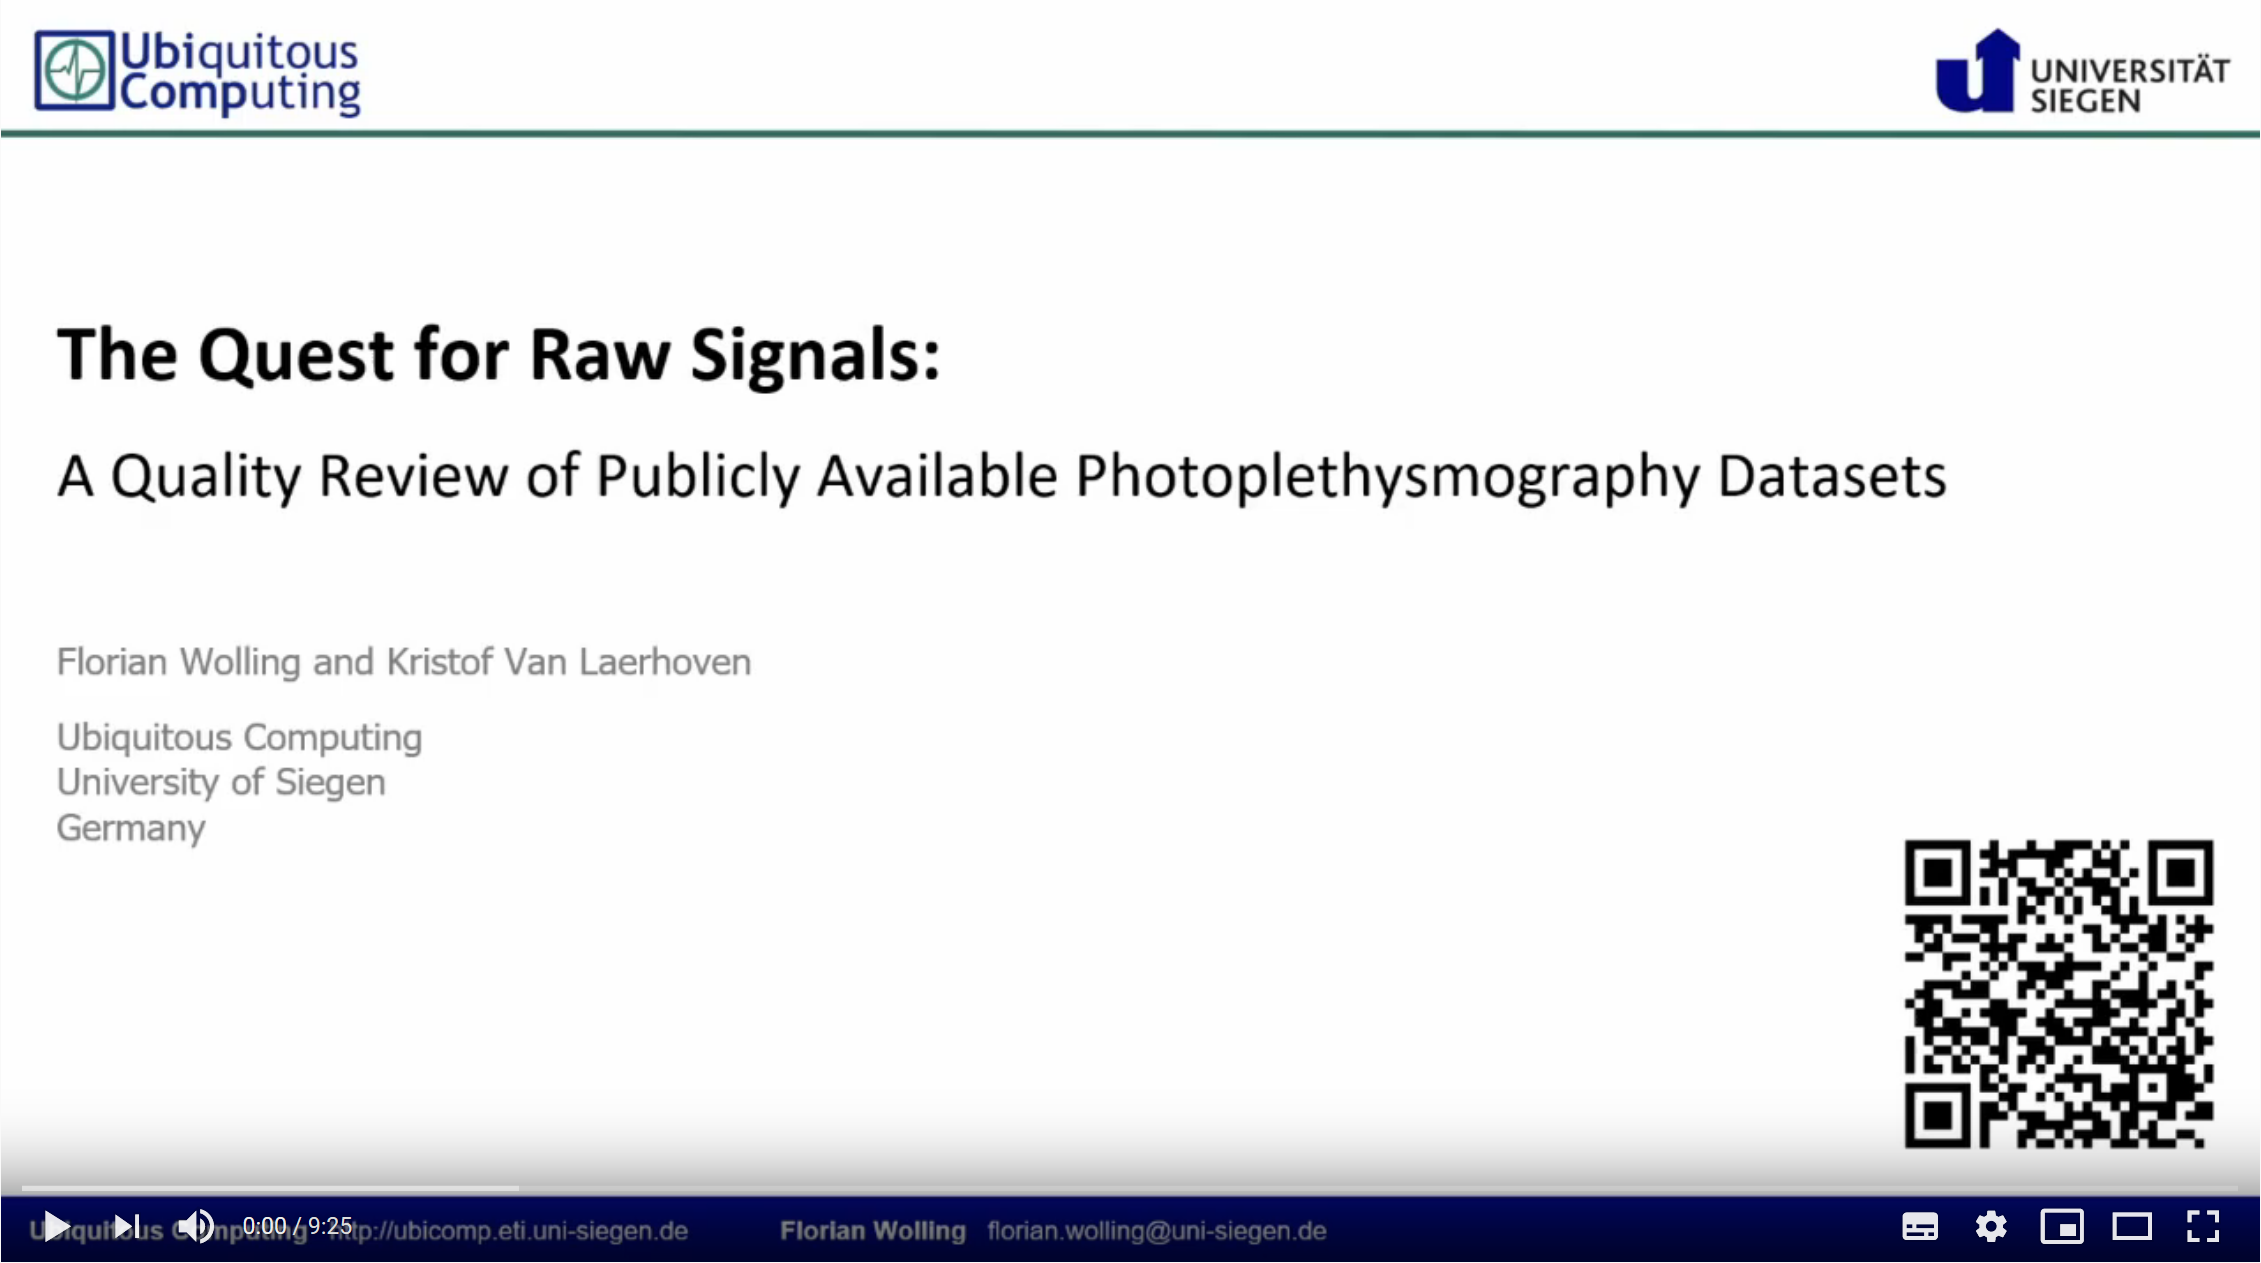 DATA'20 - The Quest for Raw Signals - A Quality Review of Photoplethysmography Datasets